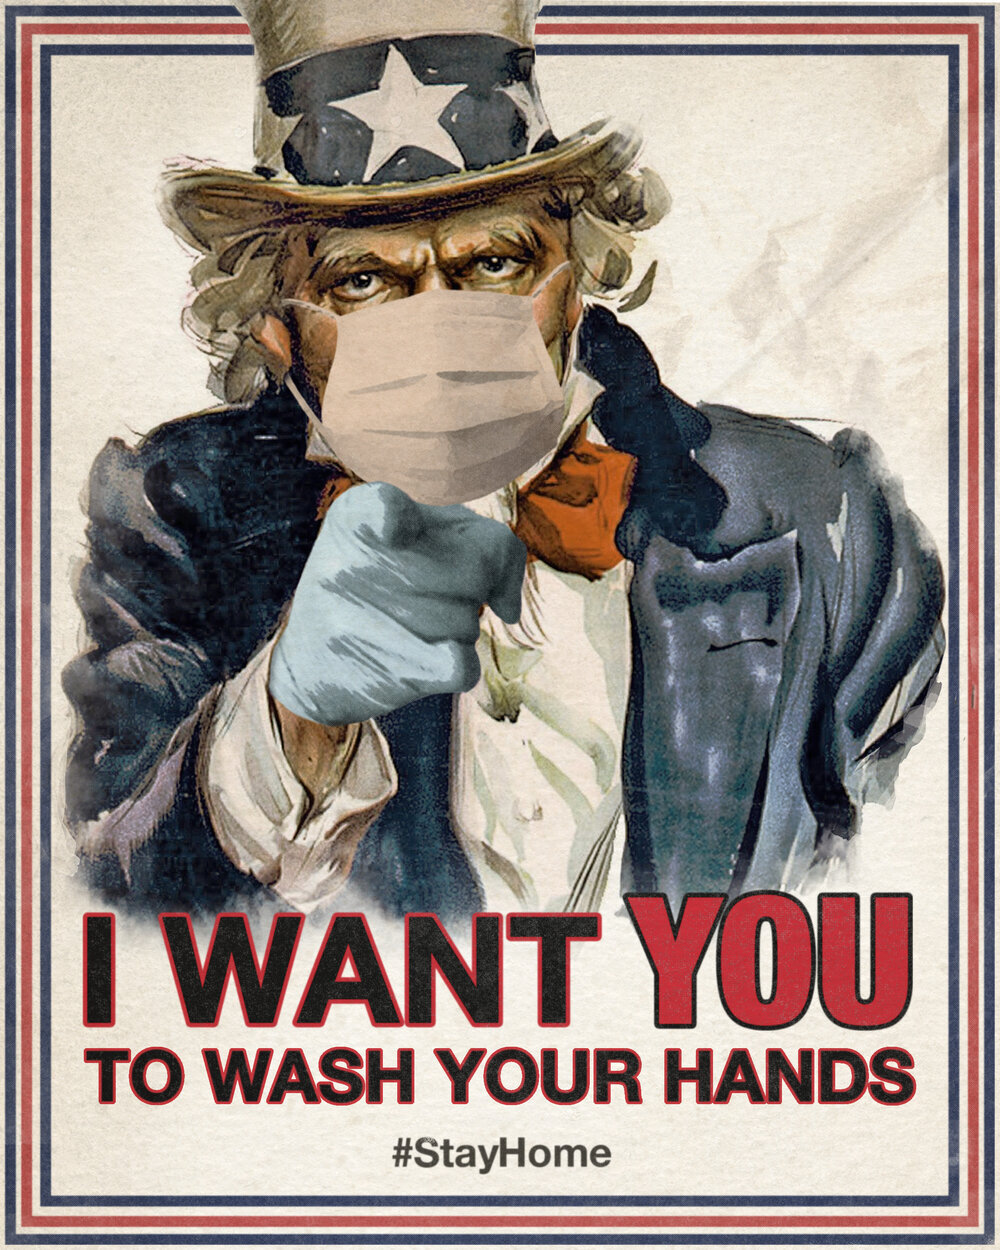 Cw-COVID-19-Uncle-Sam-StayHome-VERT_2-WASH-YOUR-HANDS-Final.jpg